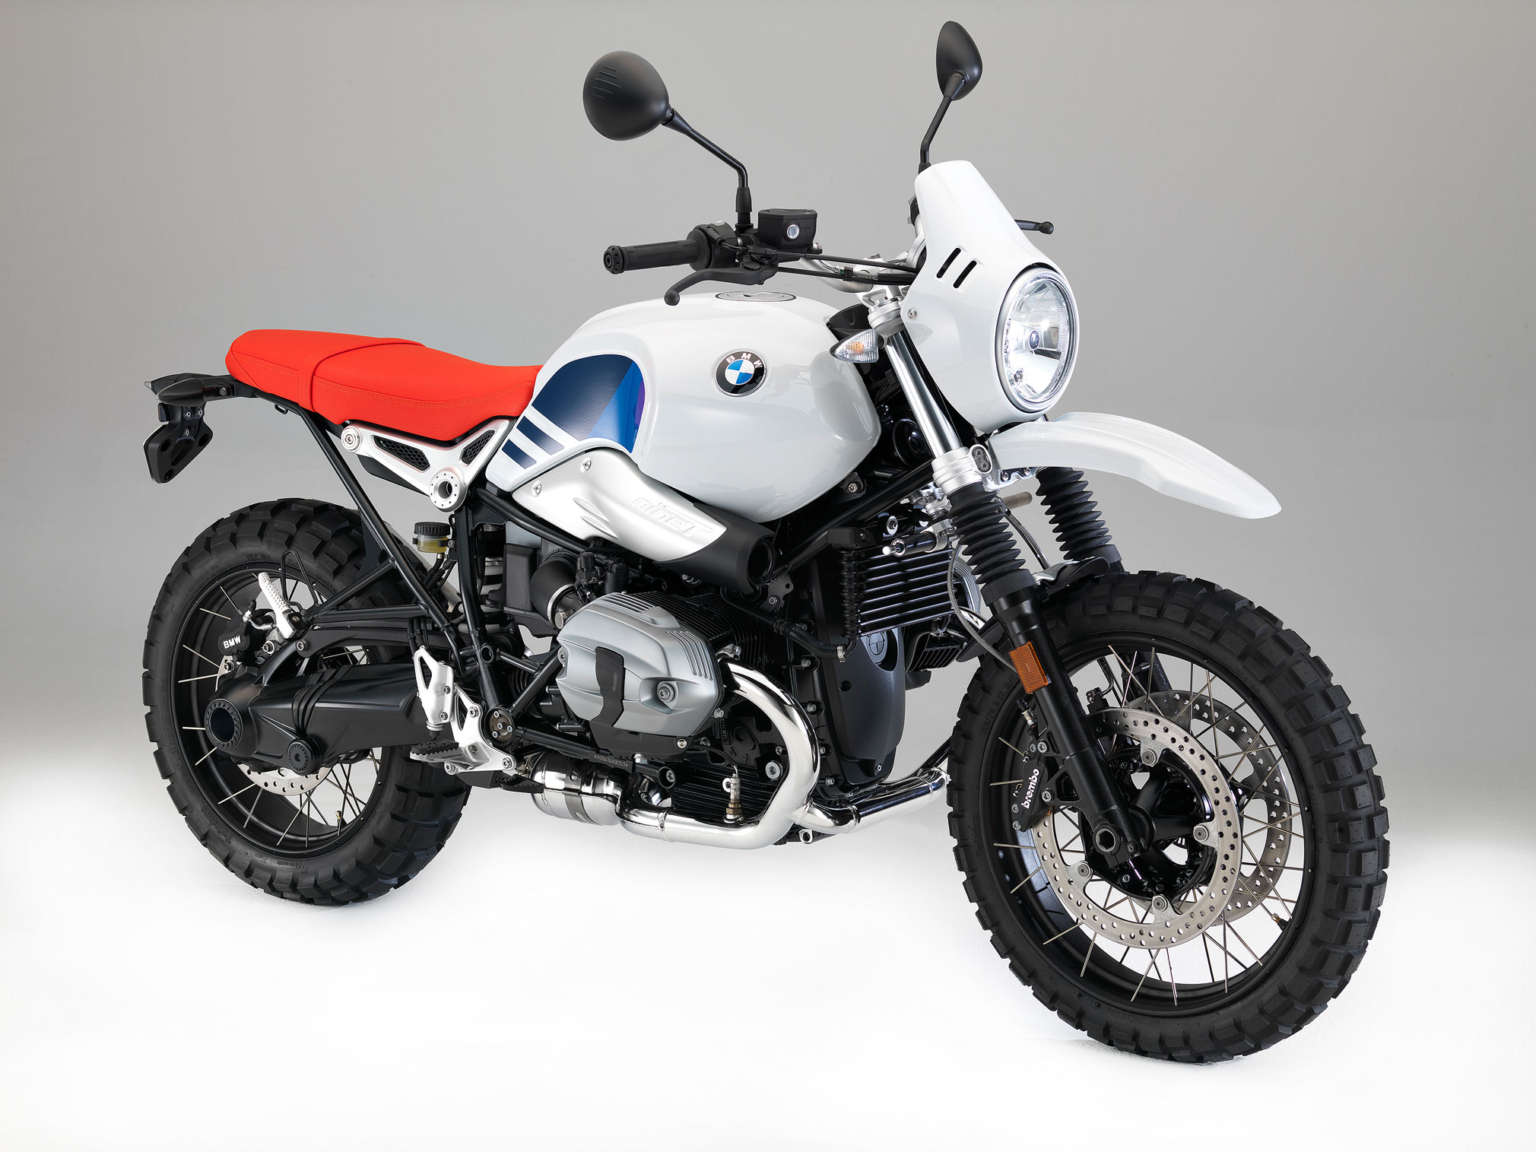 BMW R NineT Urban GS technical specifications